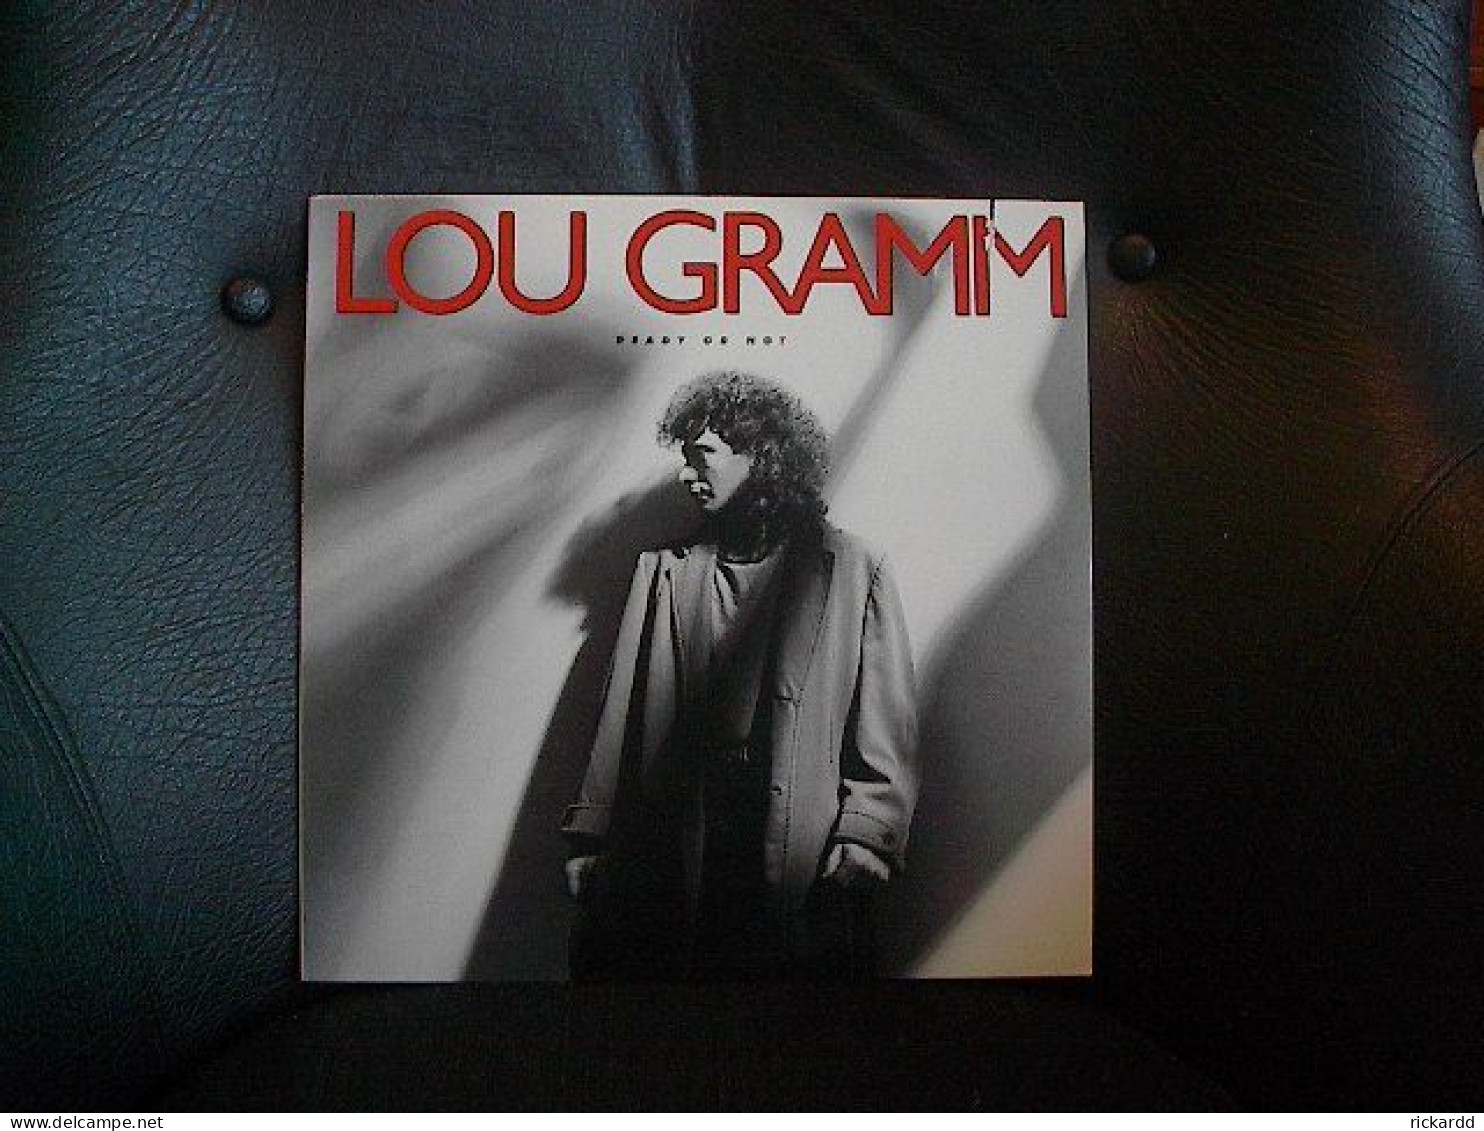 Lou Gramm (ex Foreigner) - Ready Or Not (LP) - Rock